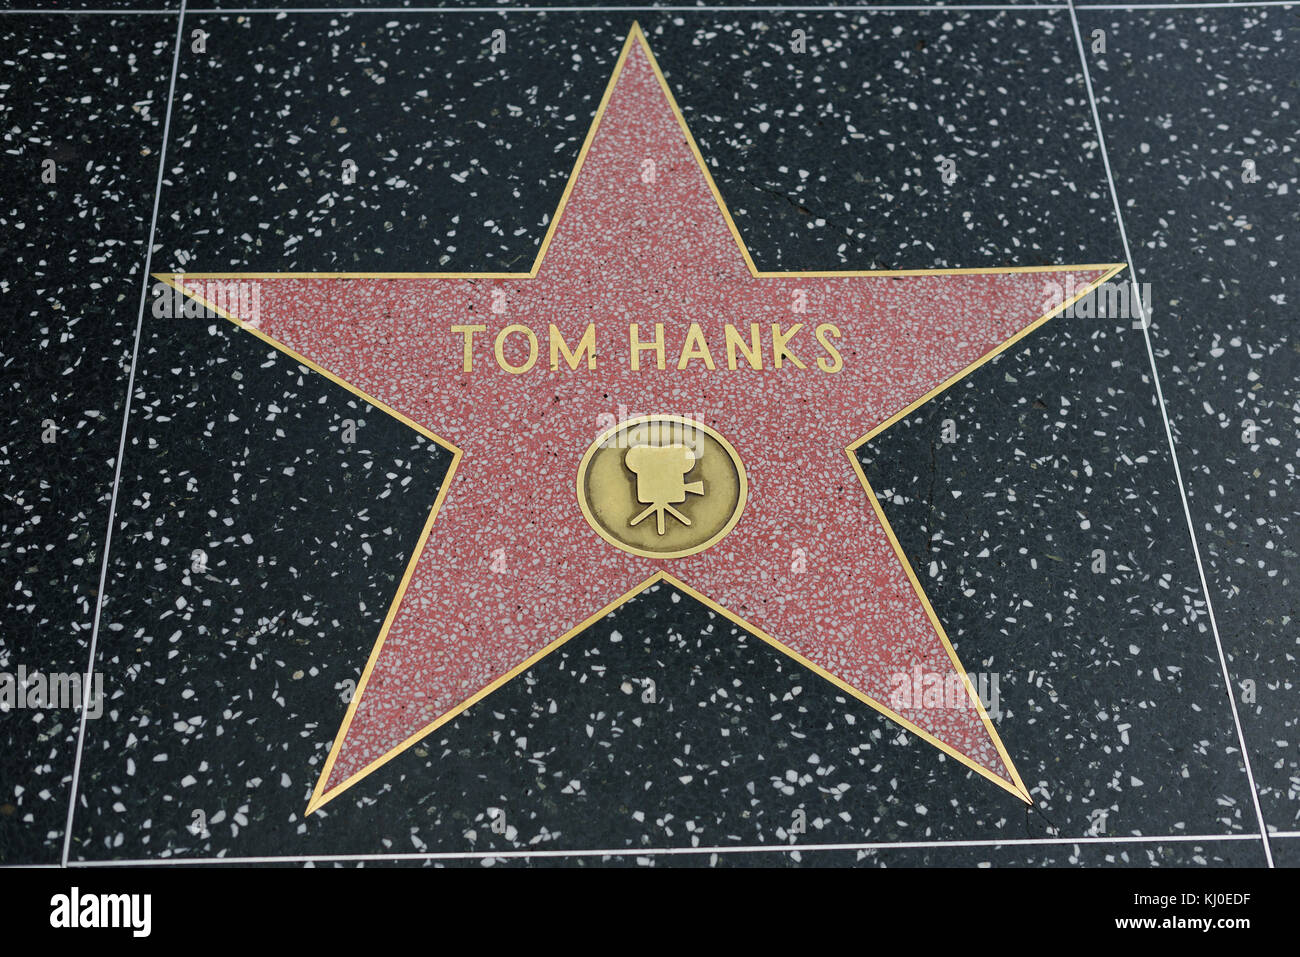 HOLLYWOOD, CA - DICEMBRE 06: Tom Hanks stella sulla Hollywood Walk of Fame a Hollywood, California il 6 dicembre 2016. Foto Stock